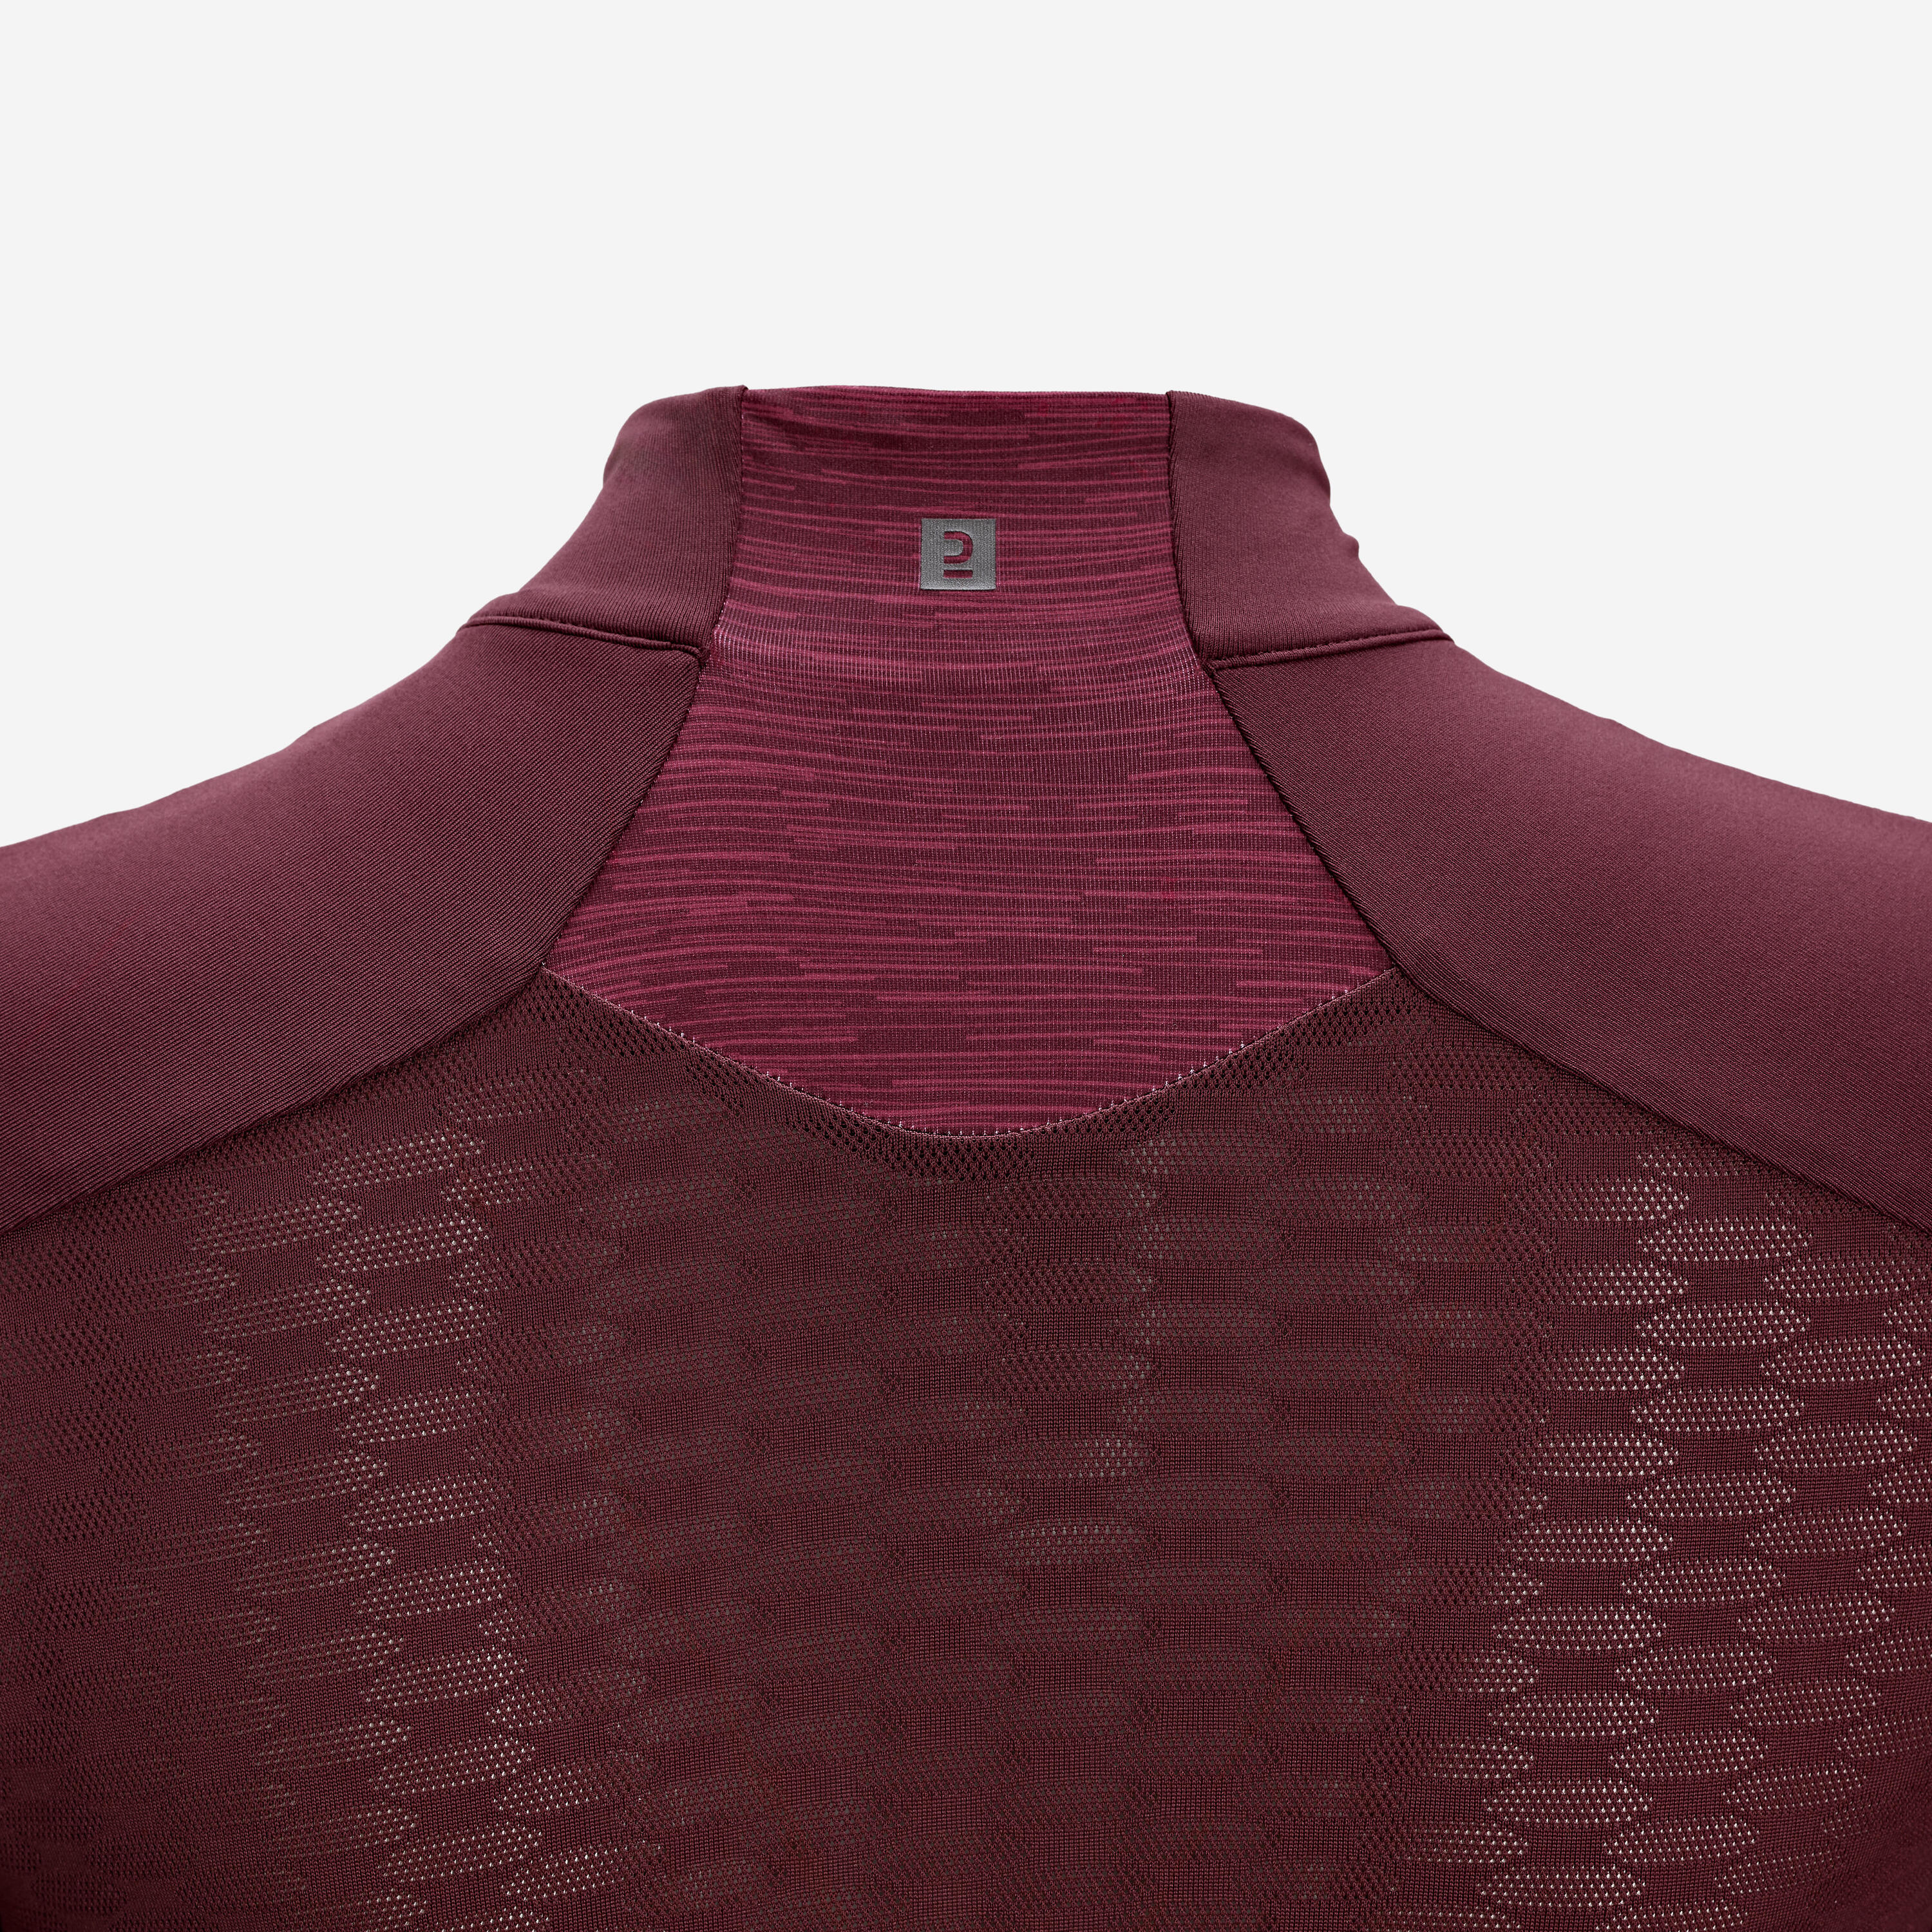 Women's Short-Sleeved Road Cycling Jersey 500 - Burgundy 6/7